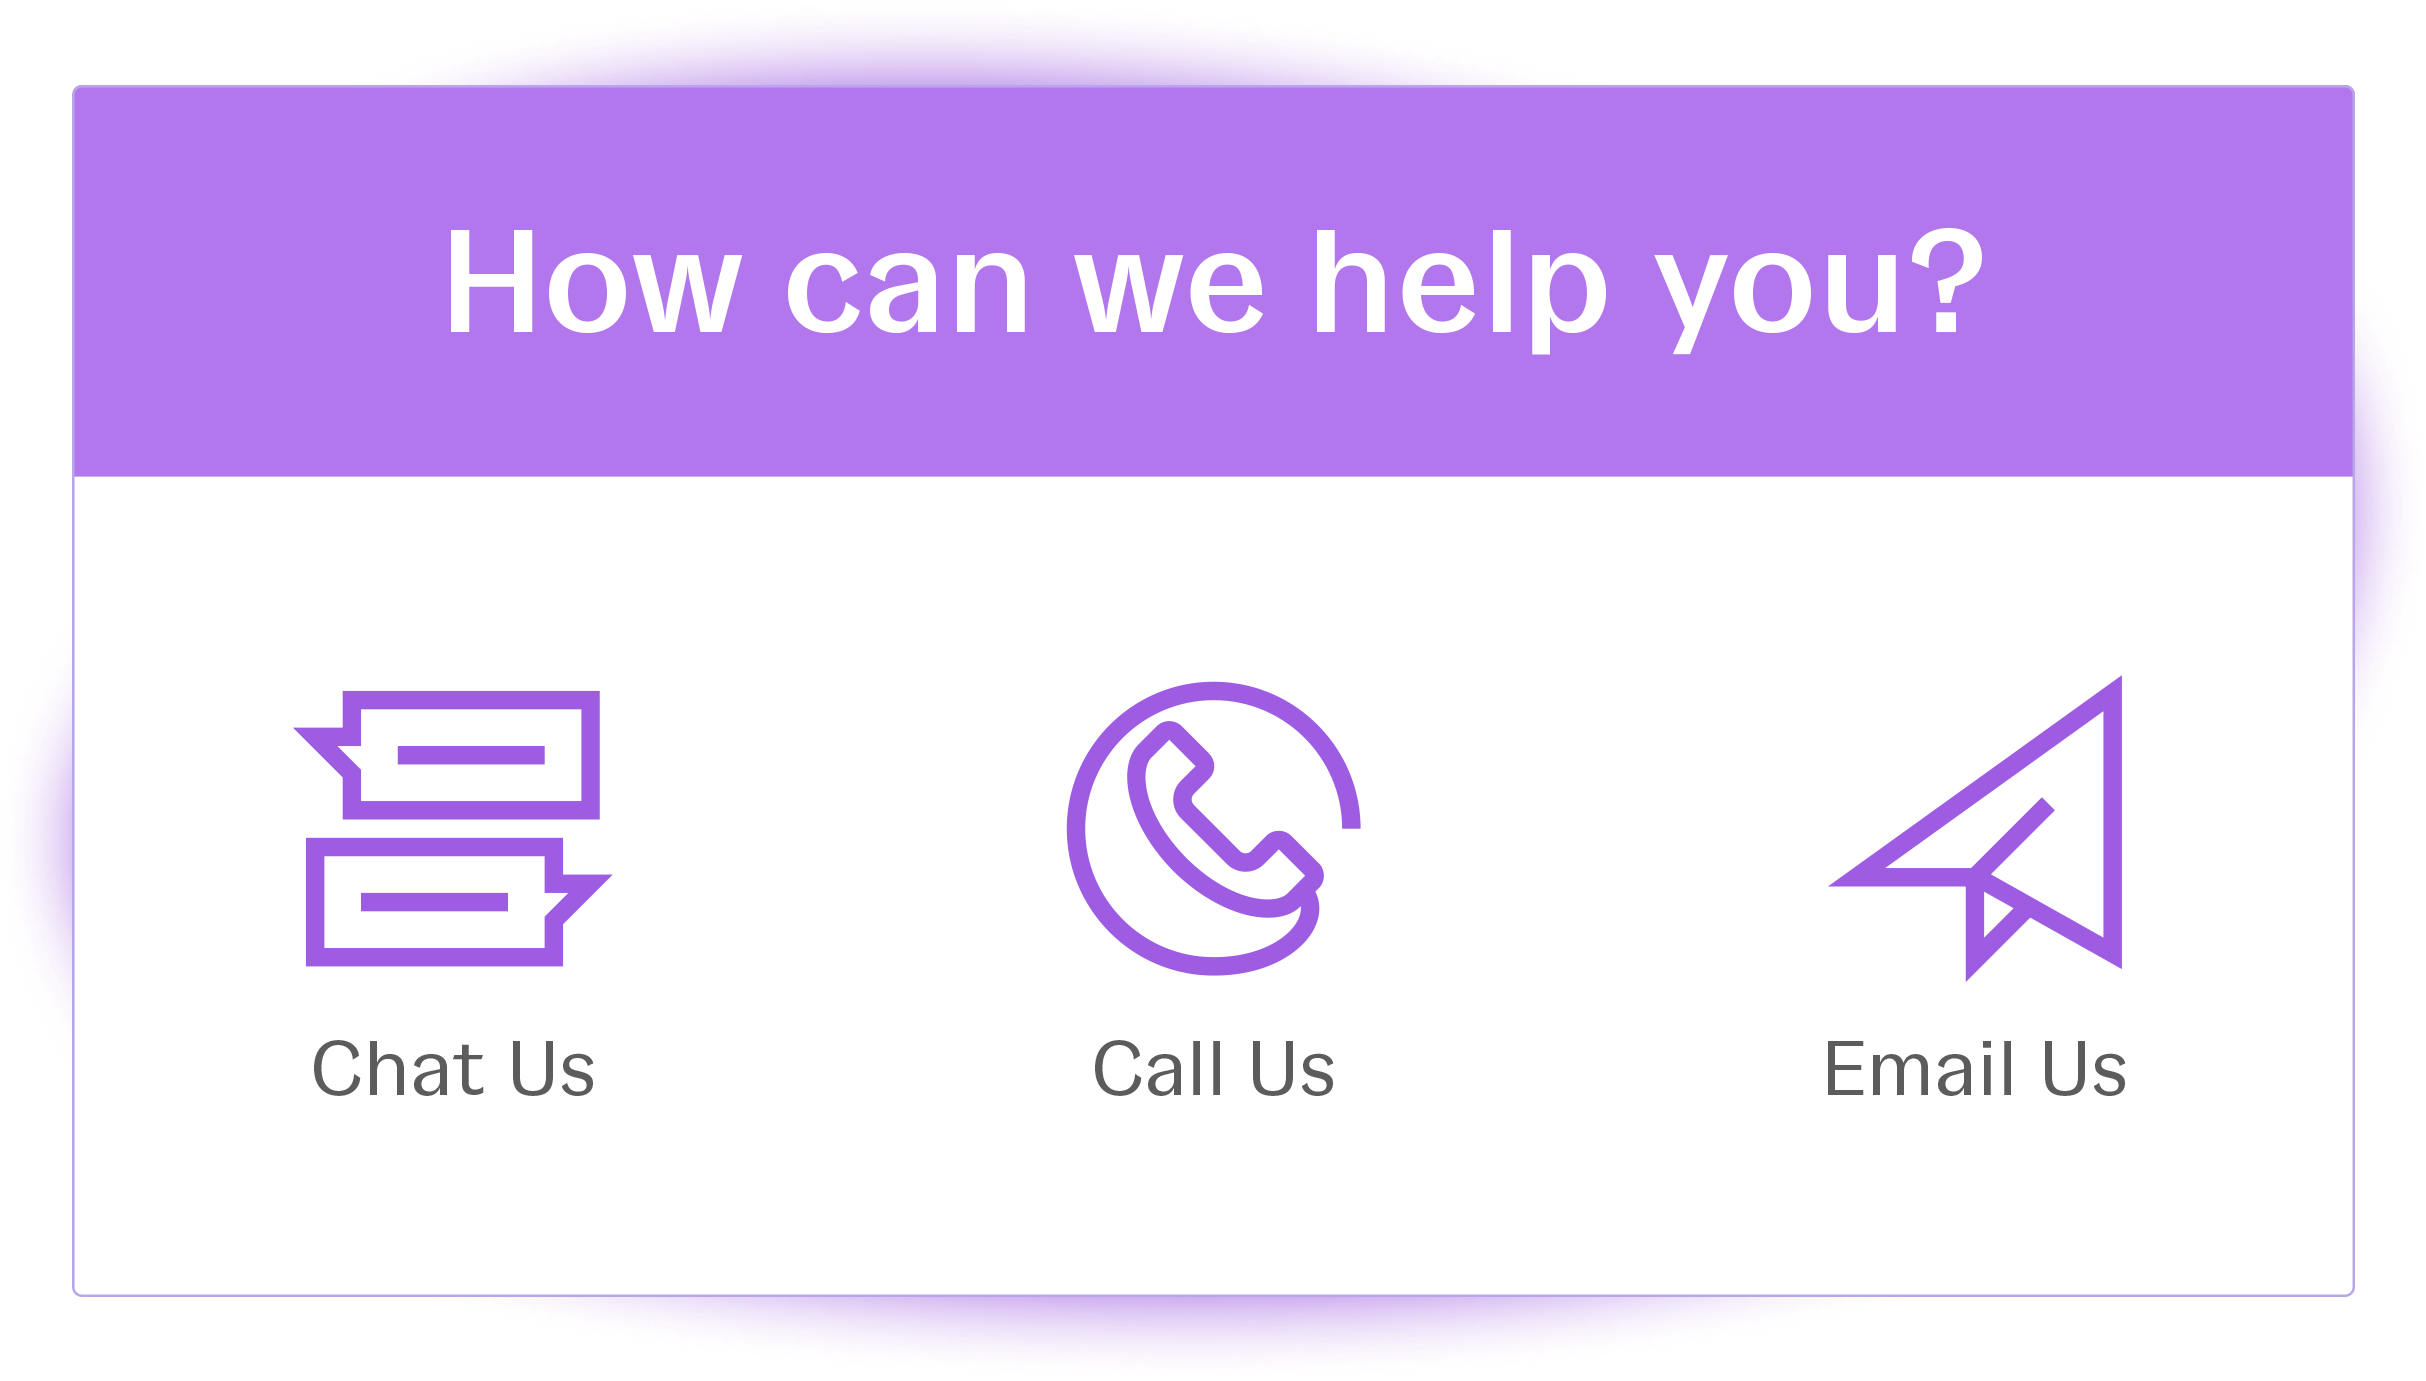 How can we help you? Chat us, call us, or email us here at Patriot Software.